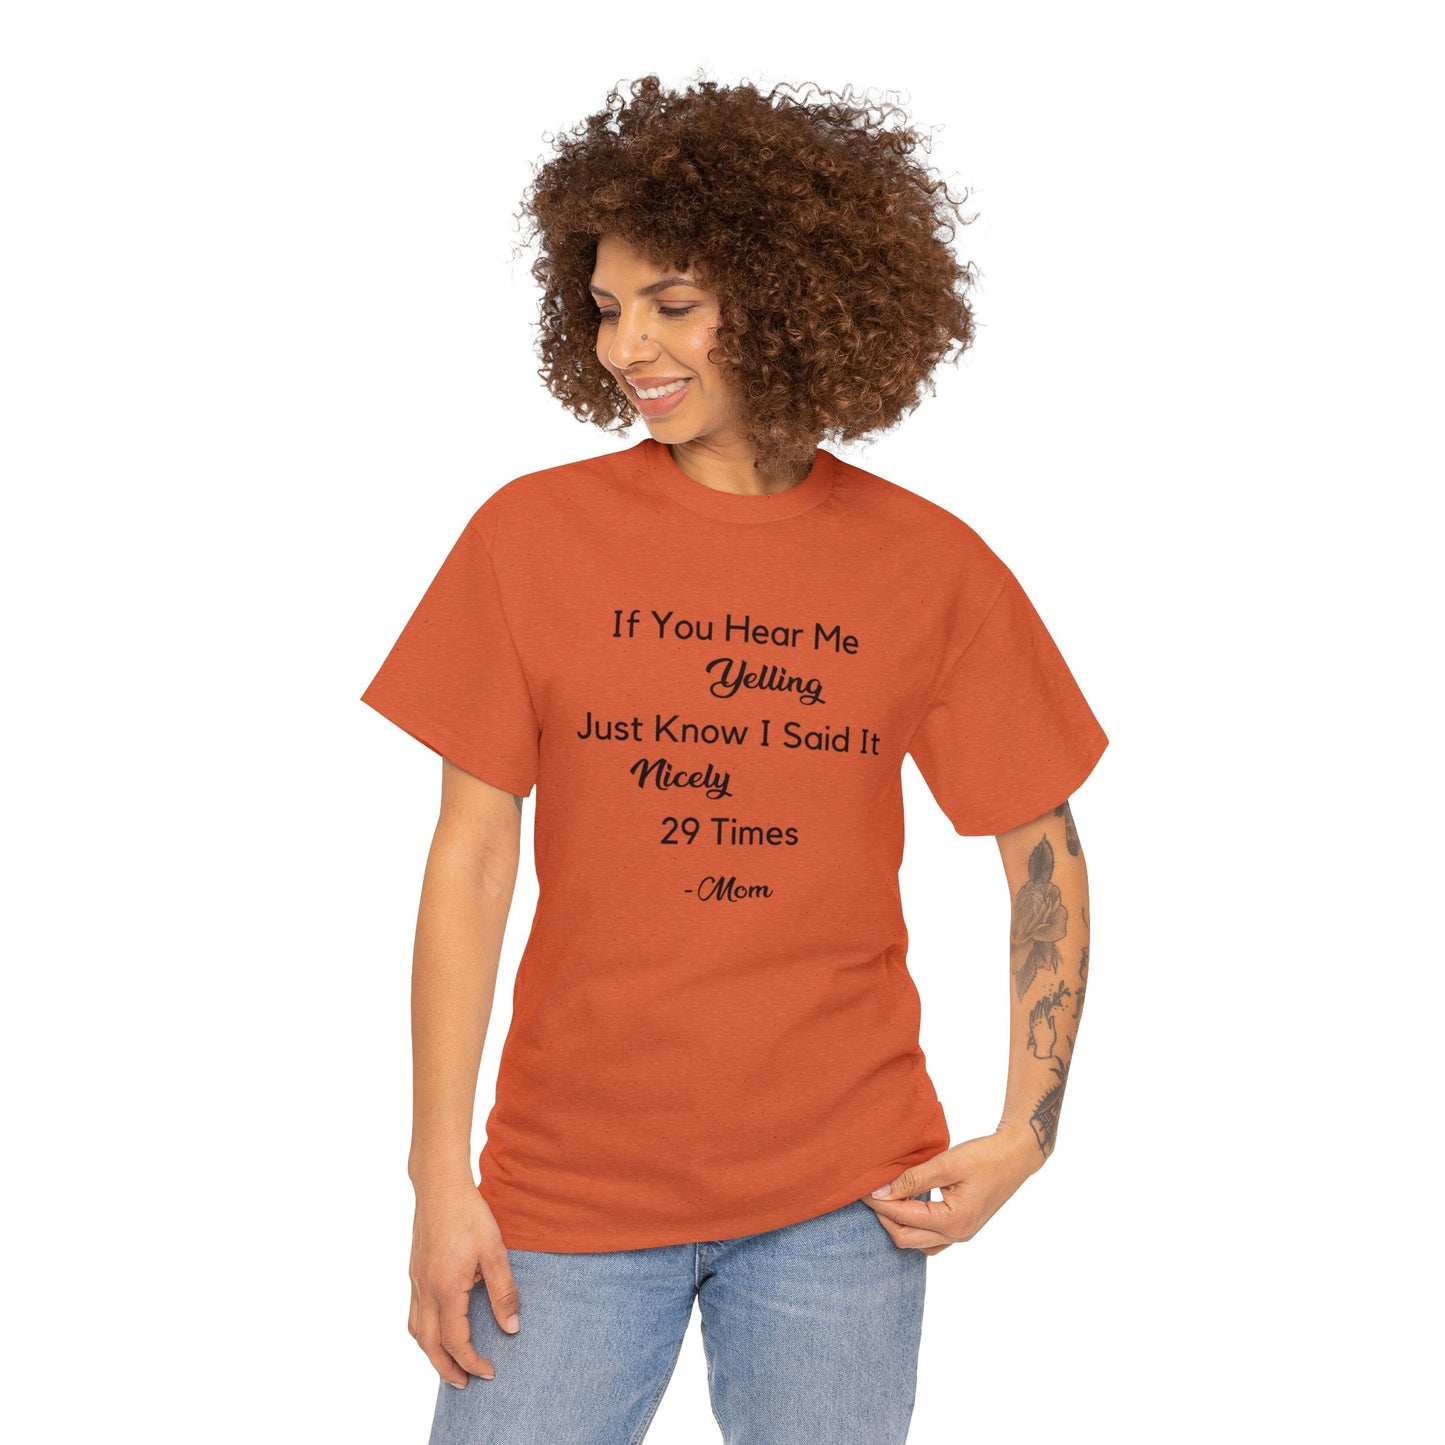 "Comfortable cotton T-shirt for moms with classic humor quote."